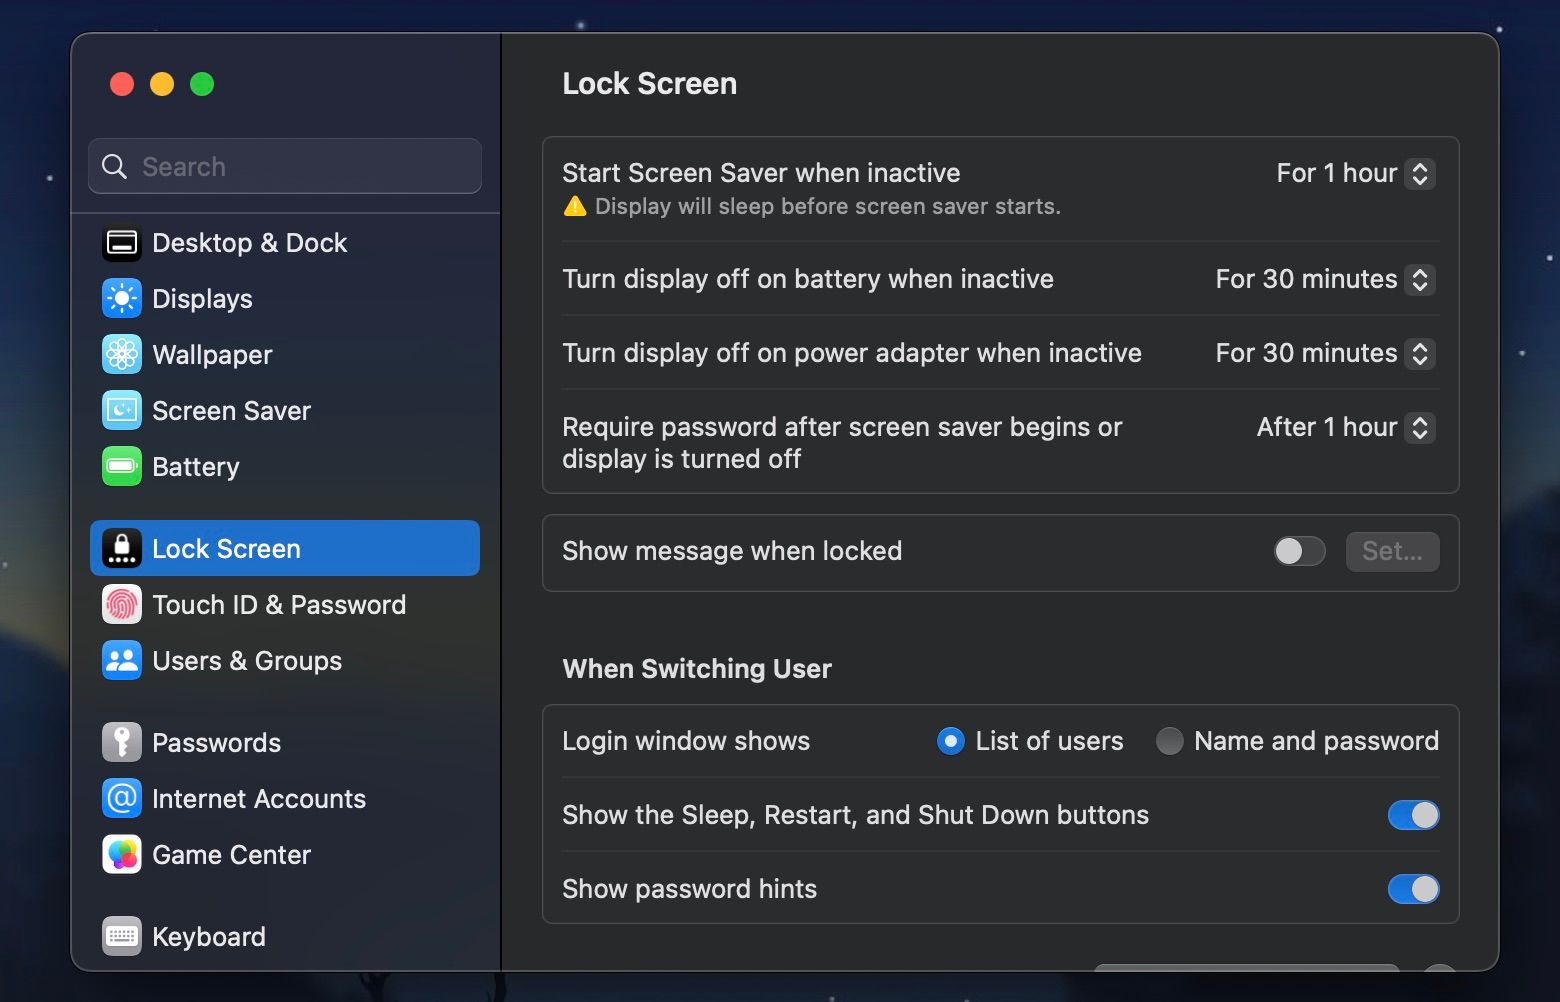 Lock Screen panel in the System Settings on macOS